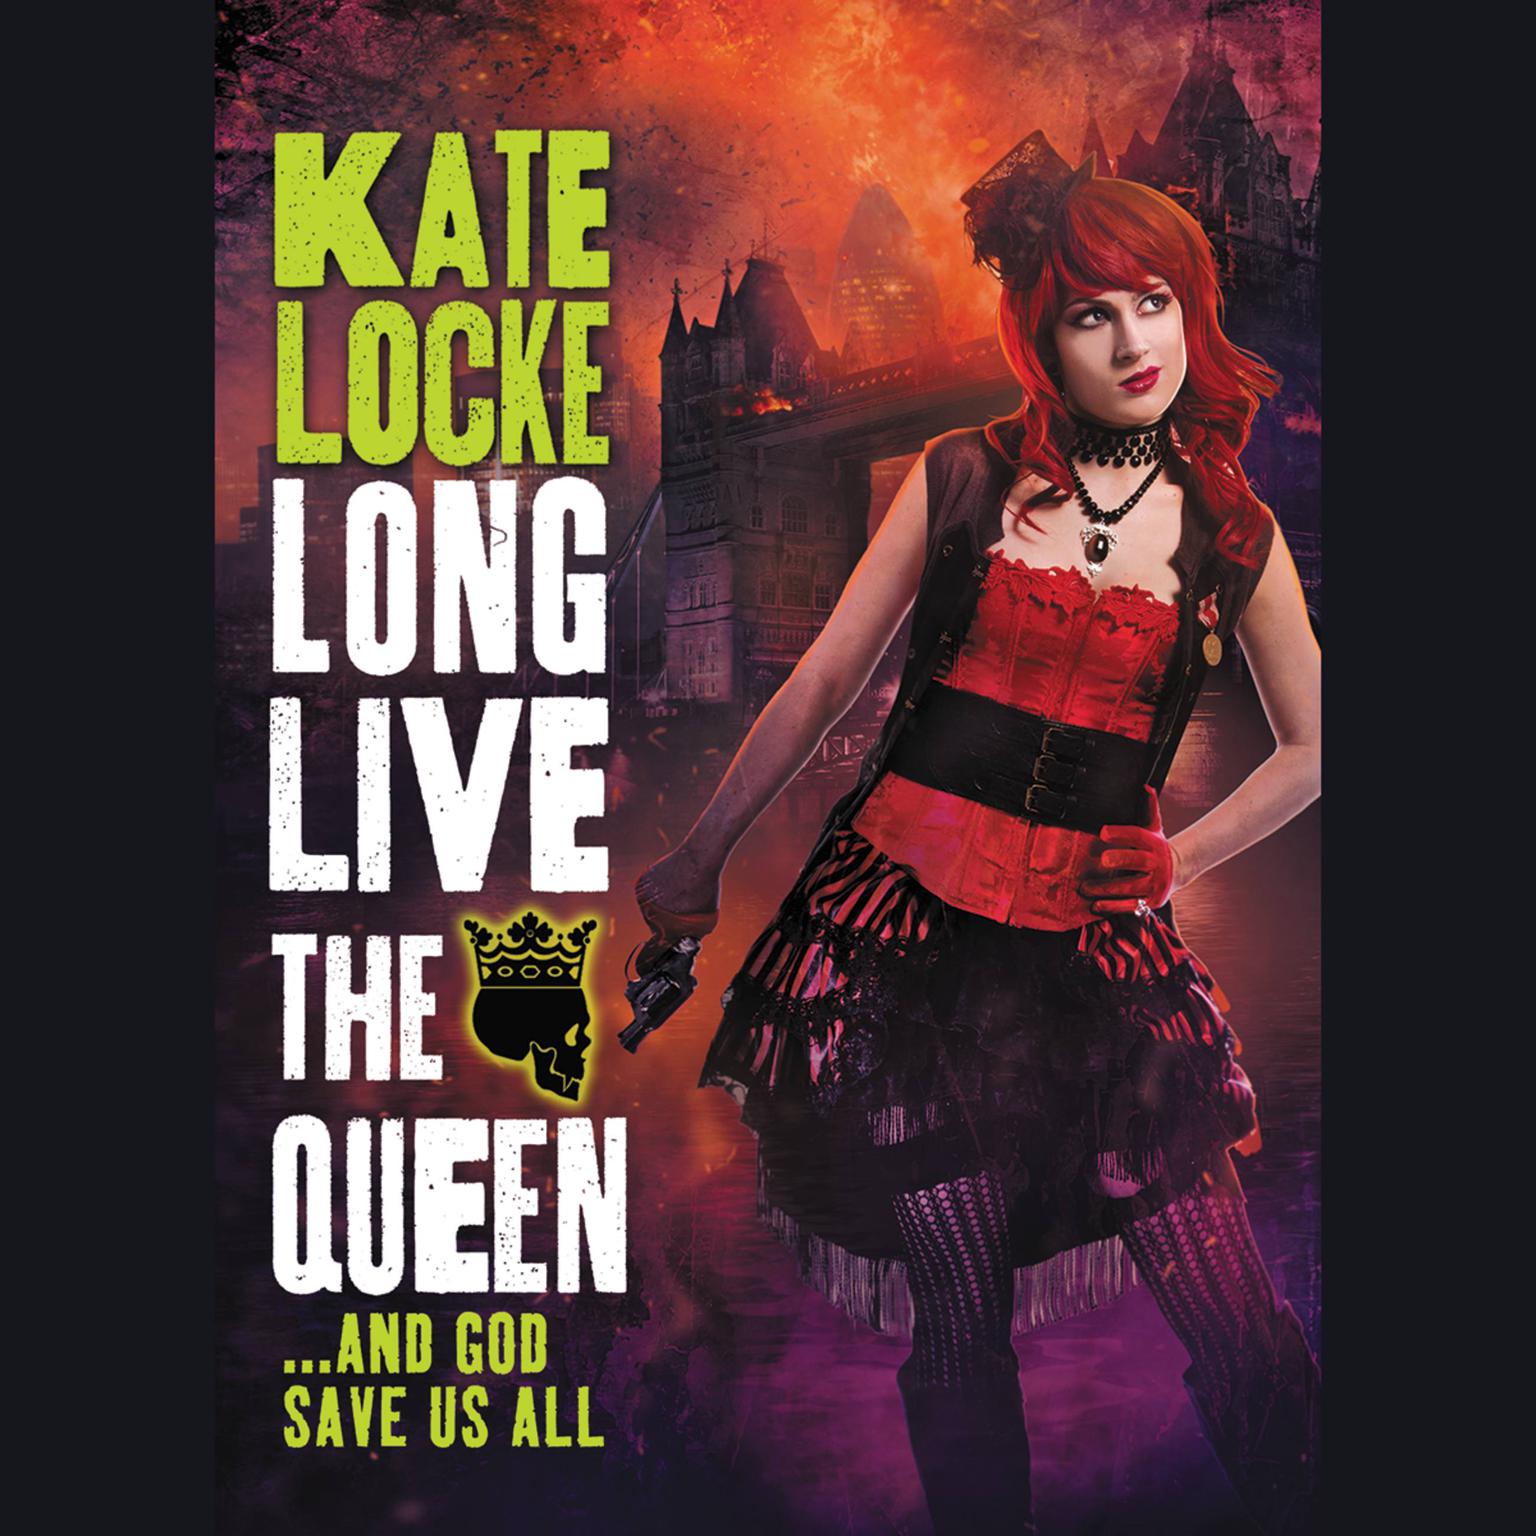 Long Live the Queen Audiobook, by Kate Locke